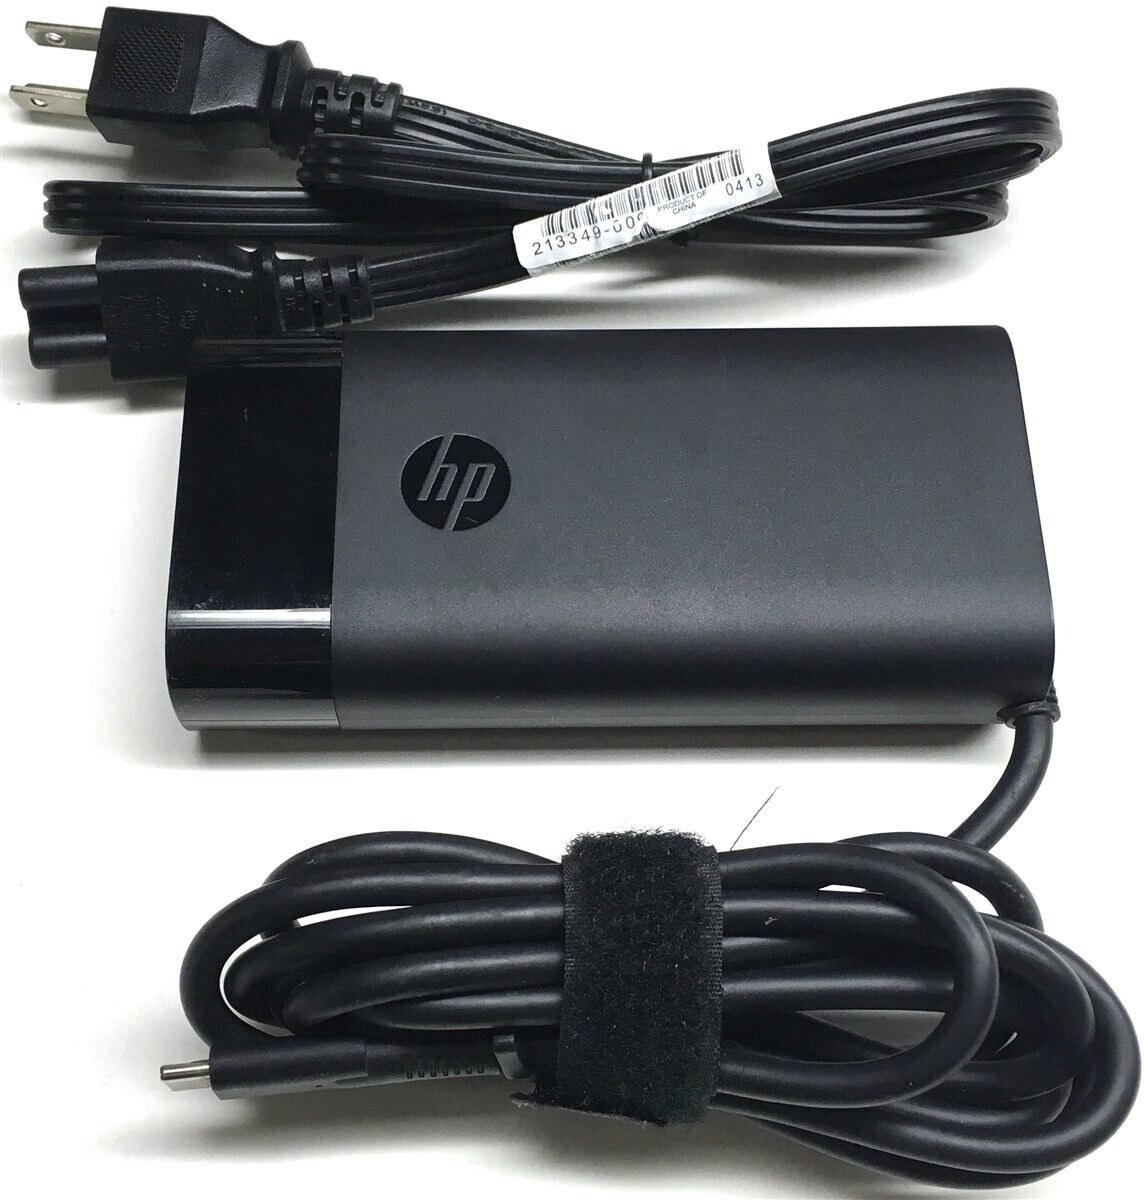 Genuine HP Spectre x360 Charger AC Power Adapter USB-C 90W 904144-850 904082-003